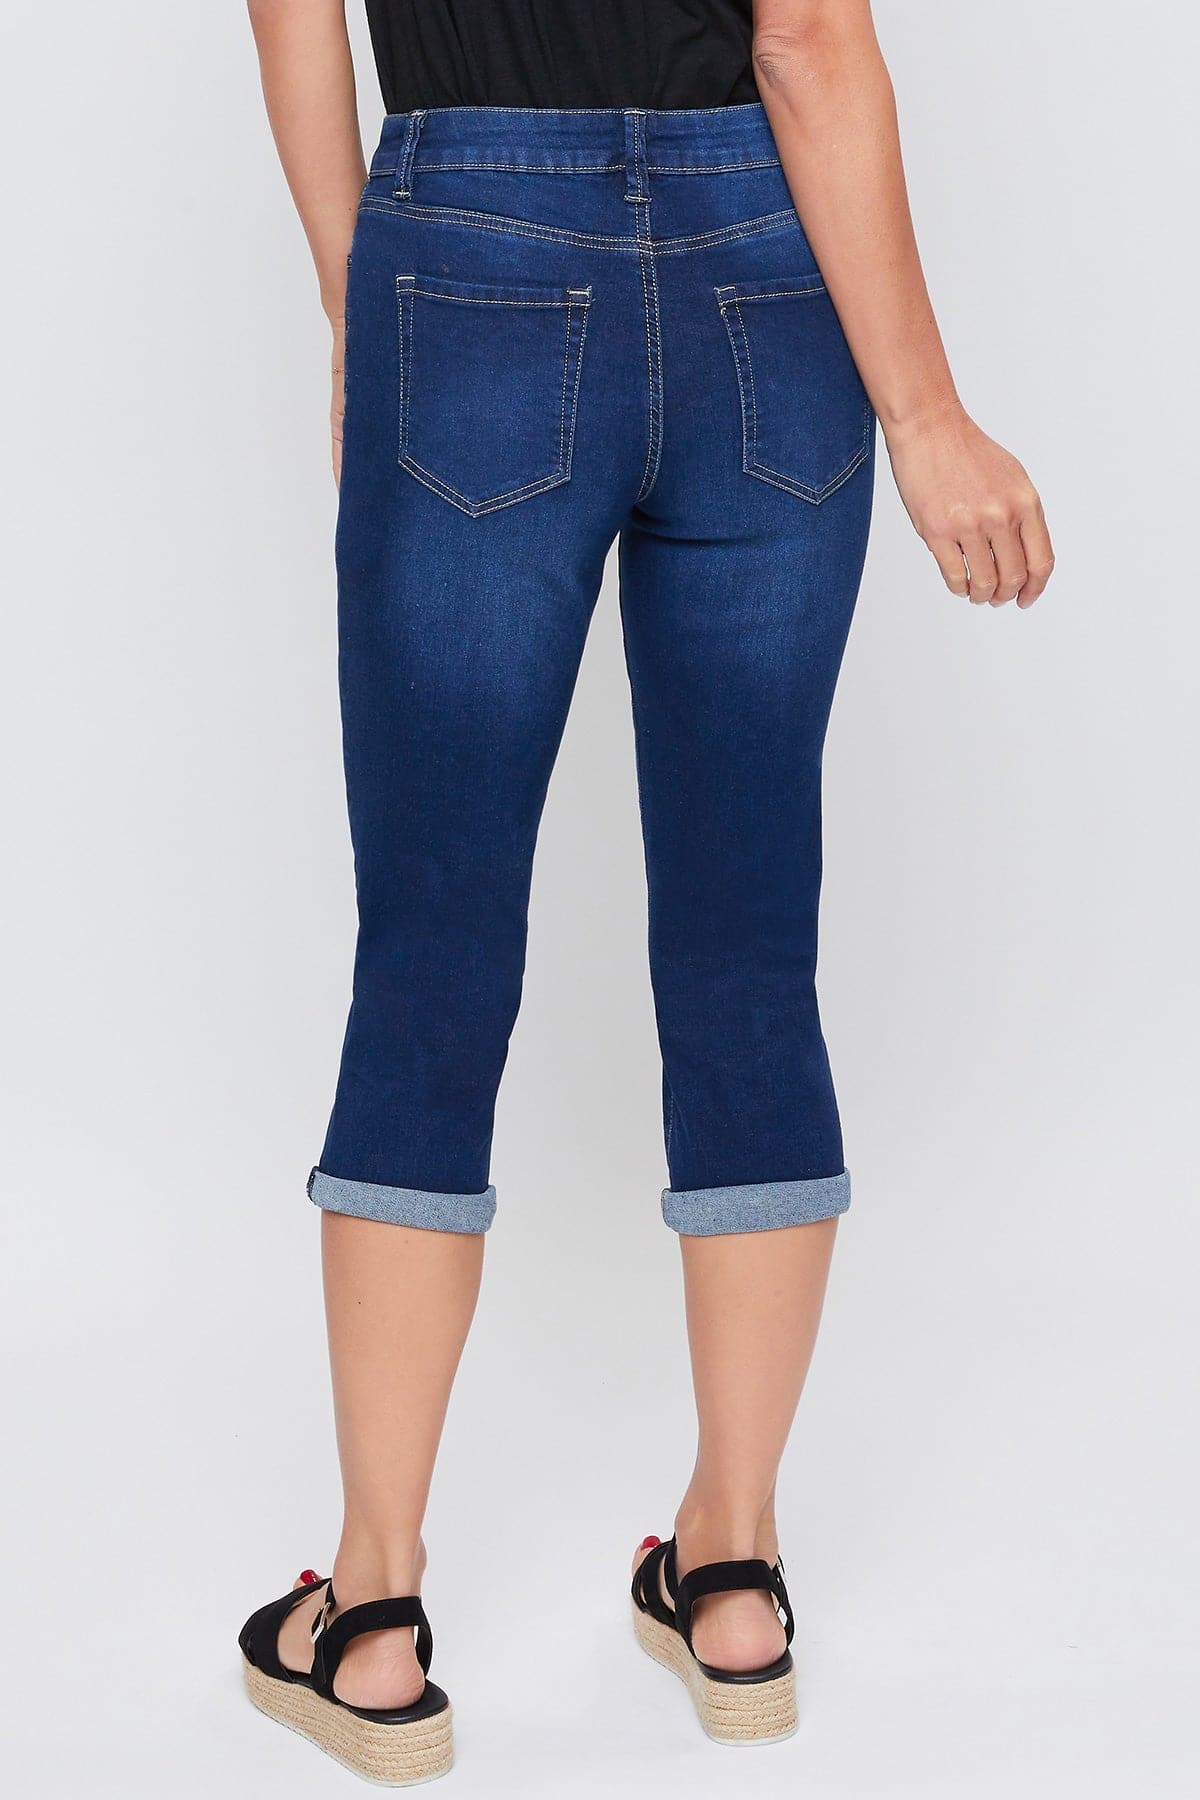 Women's Essential High Rise Cuffed Capri Jeans from ROYALTY – Royalty For me